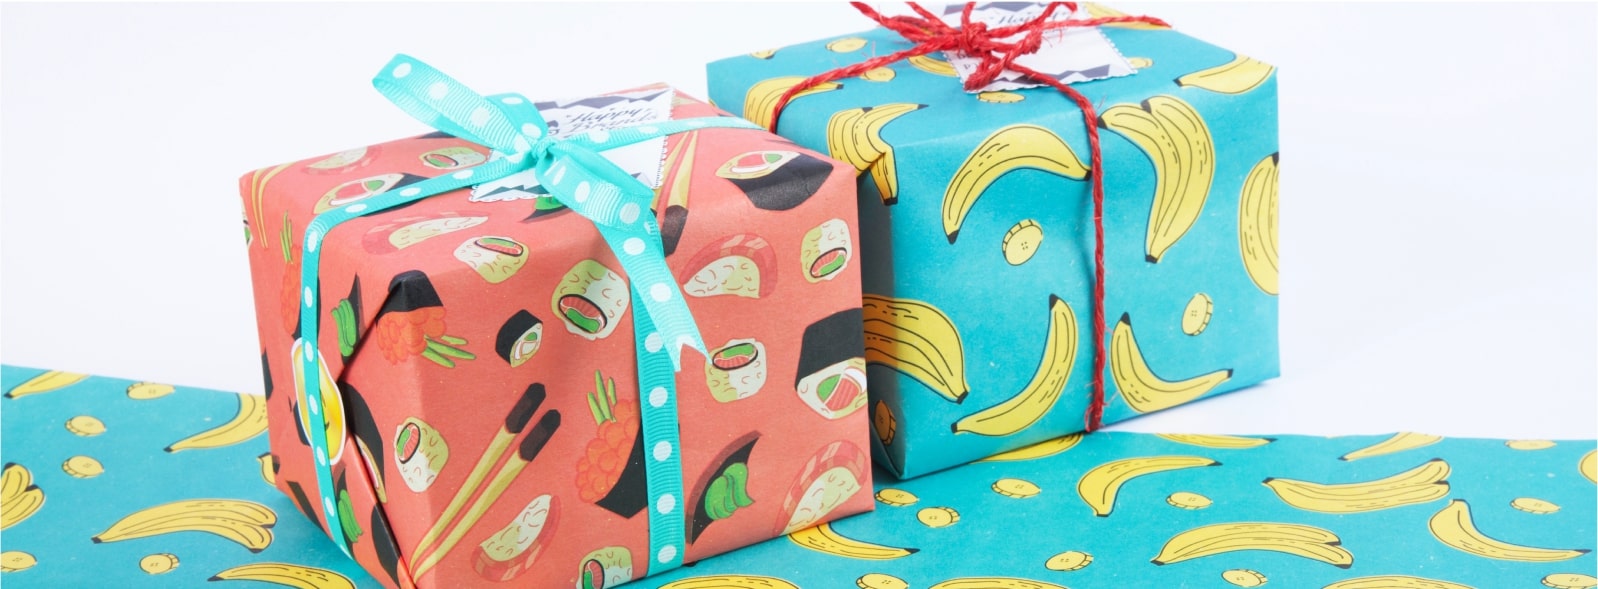 A mockup image of two gifts wrapped in custom wrapping paper.